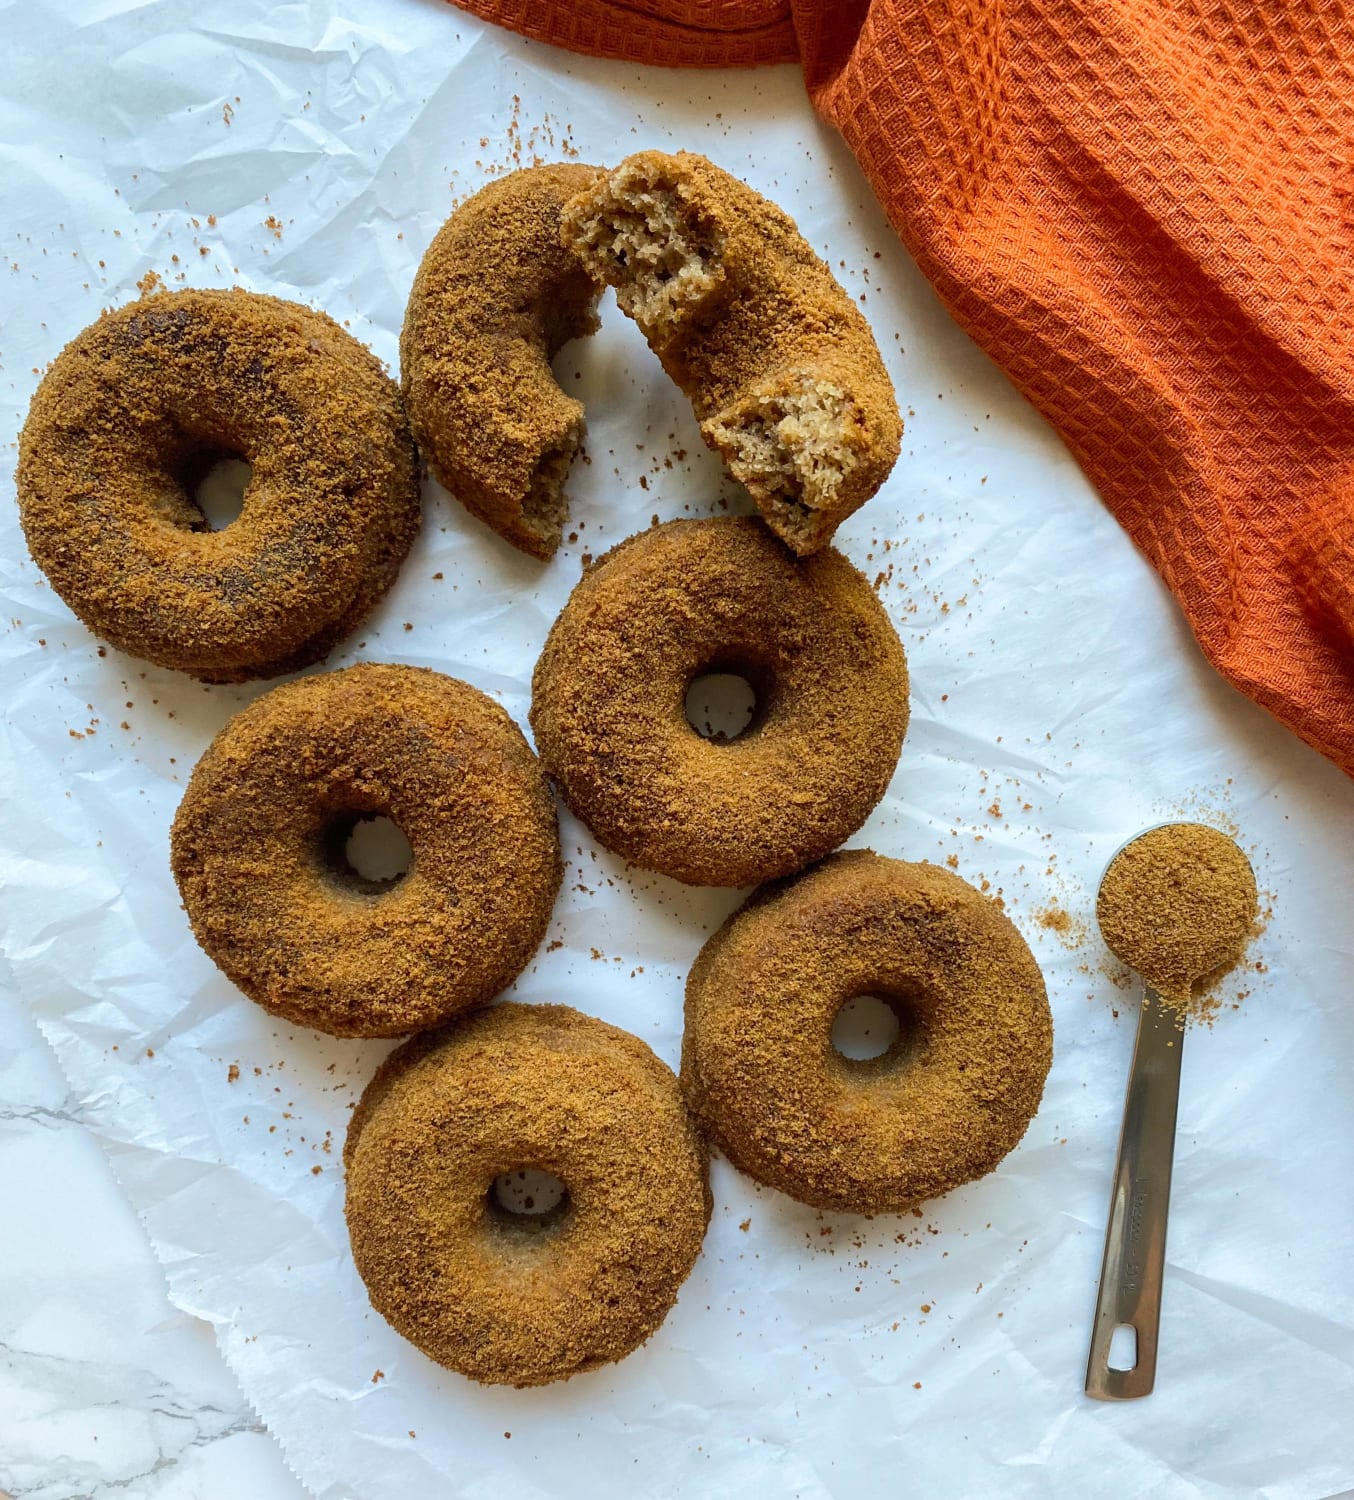 Apple Cider Donuts - my first time making baked donuts!